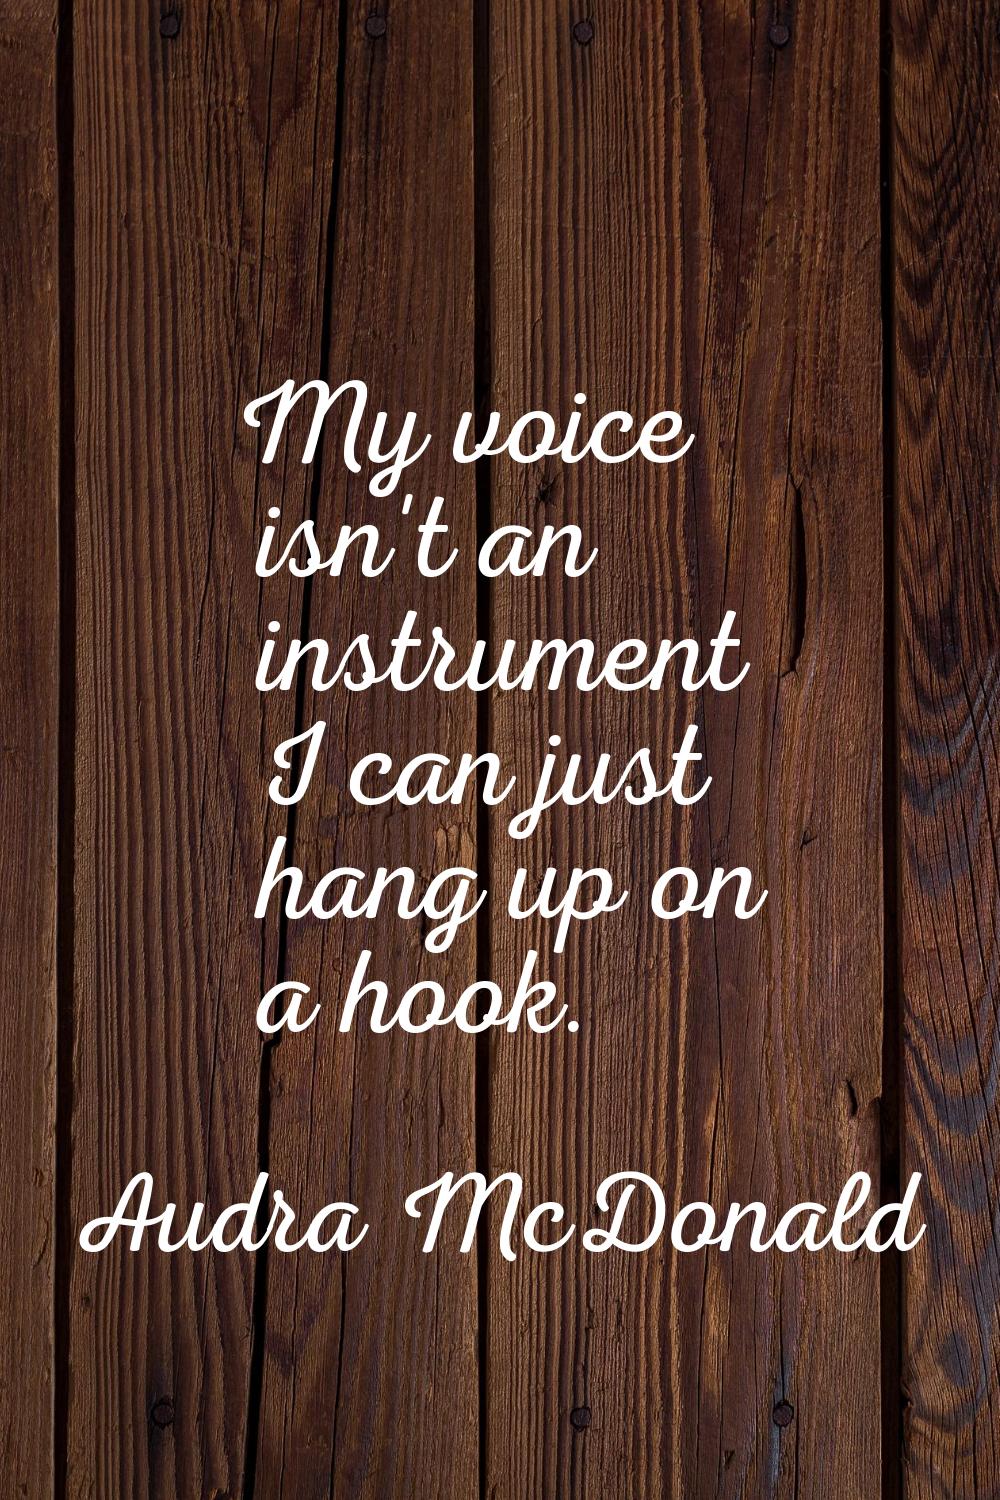 My voice isn't an instrument I can just hang up on a hook.